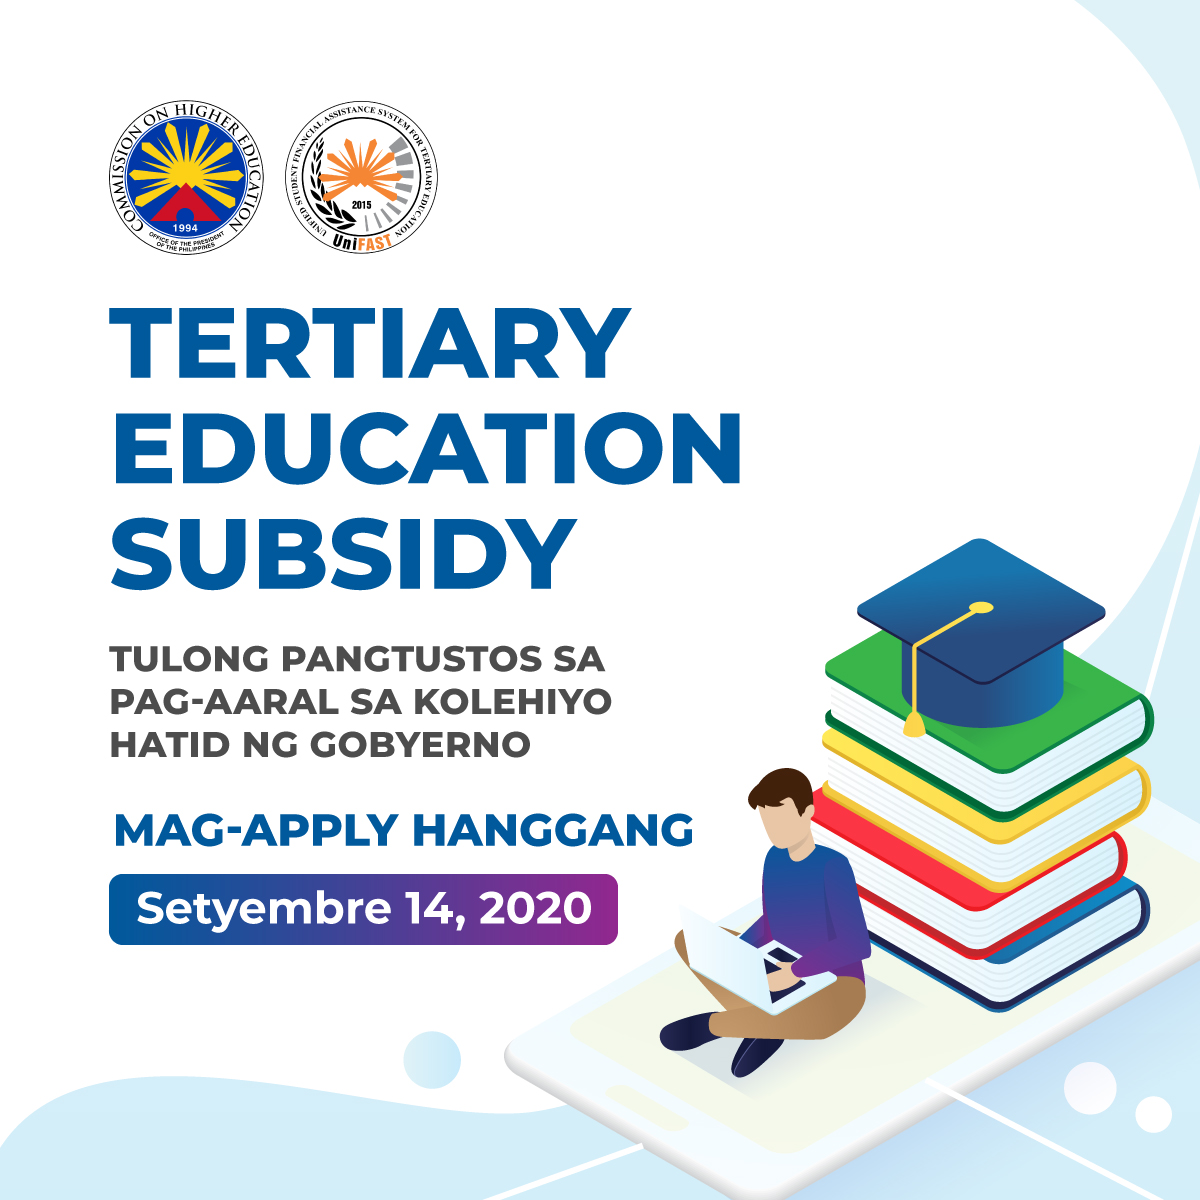 Apply for Tertiary Education Subsidy until Sept. 14, 2020